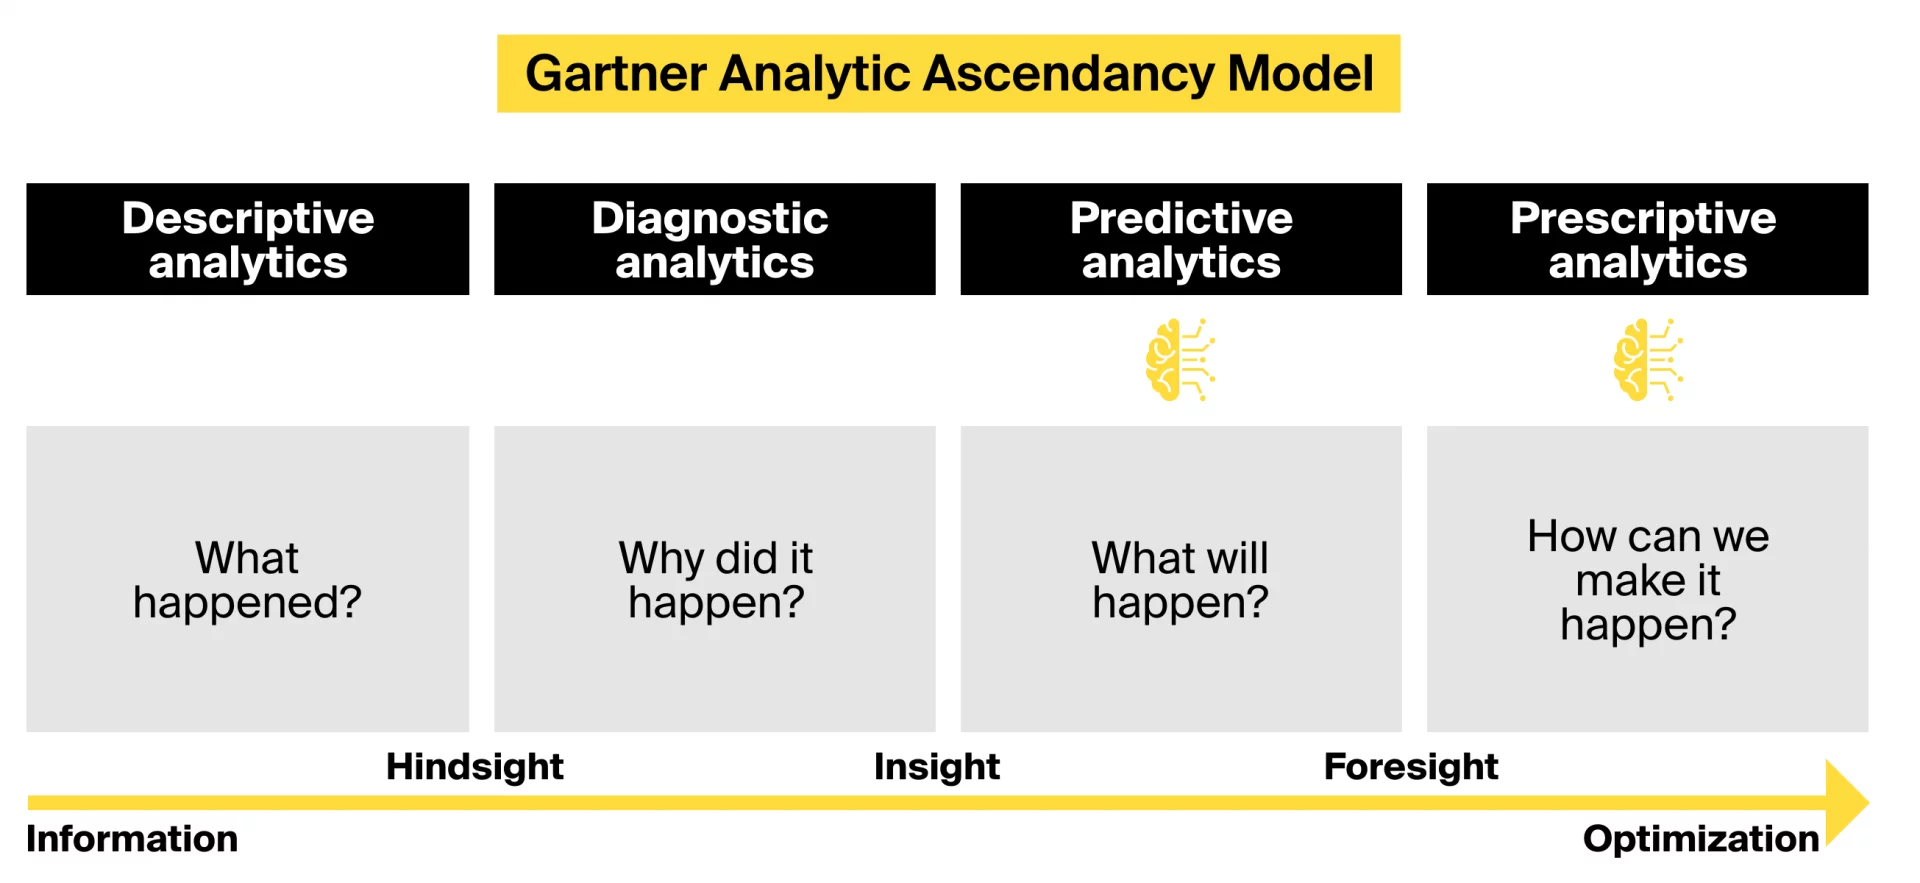 According to Gartner's Analytic Ascendancy Model, the value of data analytics increases with the complexity of the technology applied.